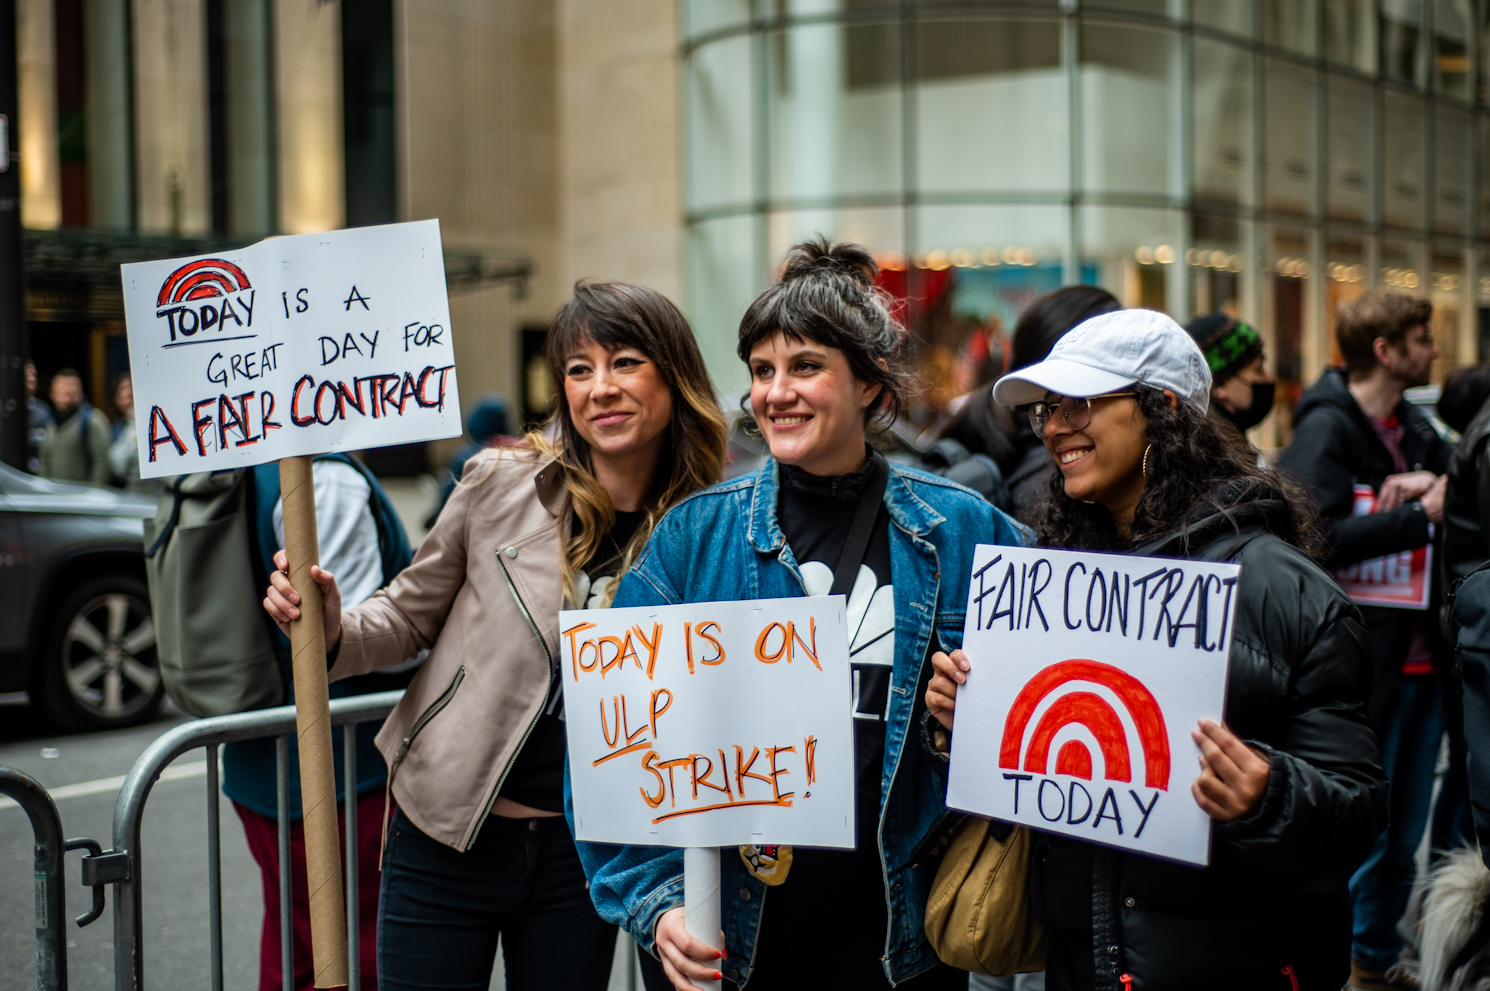 Three women pose with signs advocating for a fair contract.